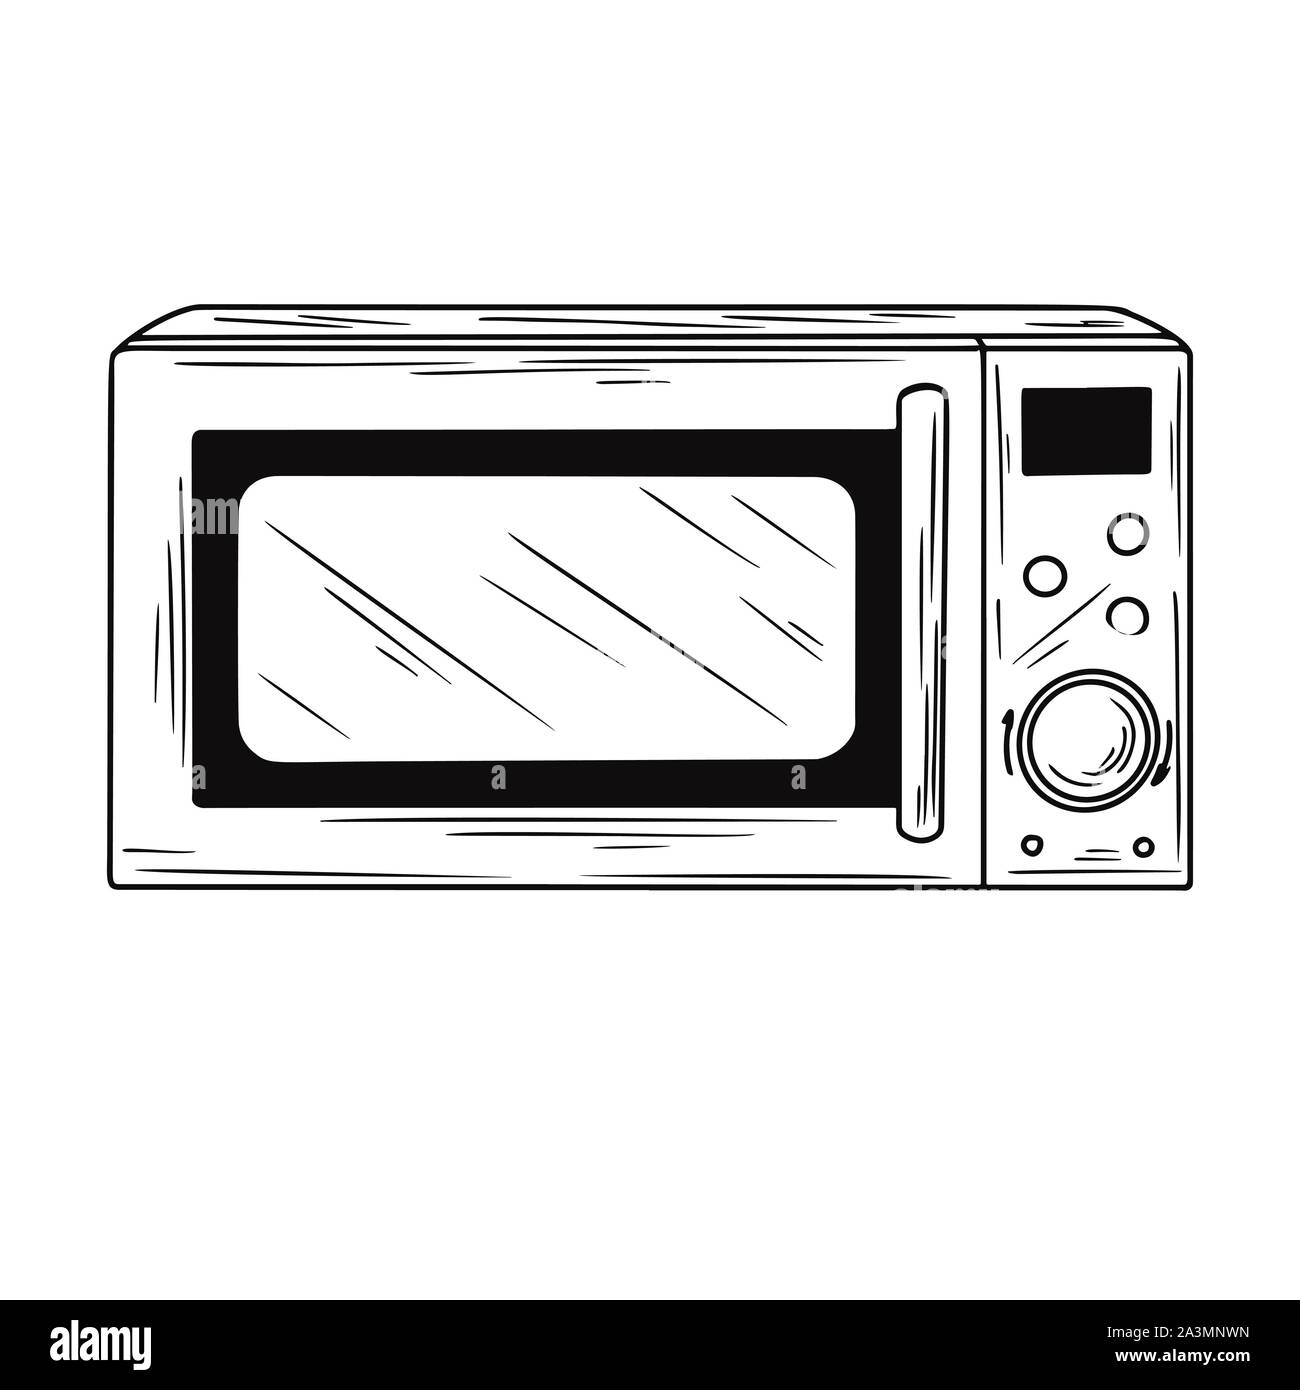 5998 Stove Oven Drawing Images Stock Photos  Vectors  Shutterstock